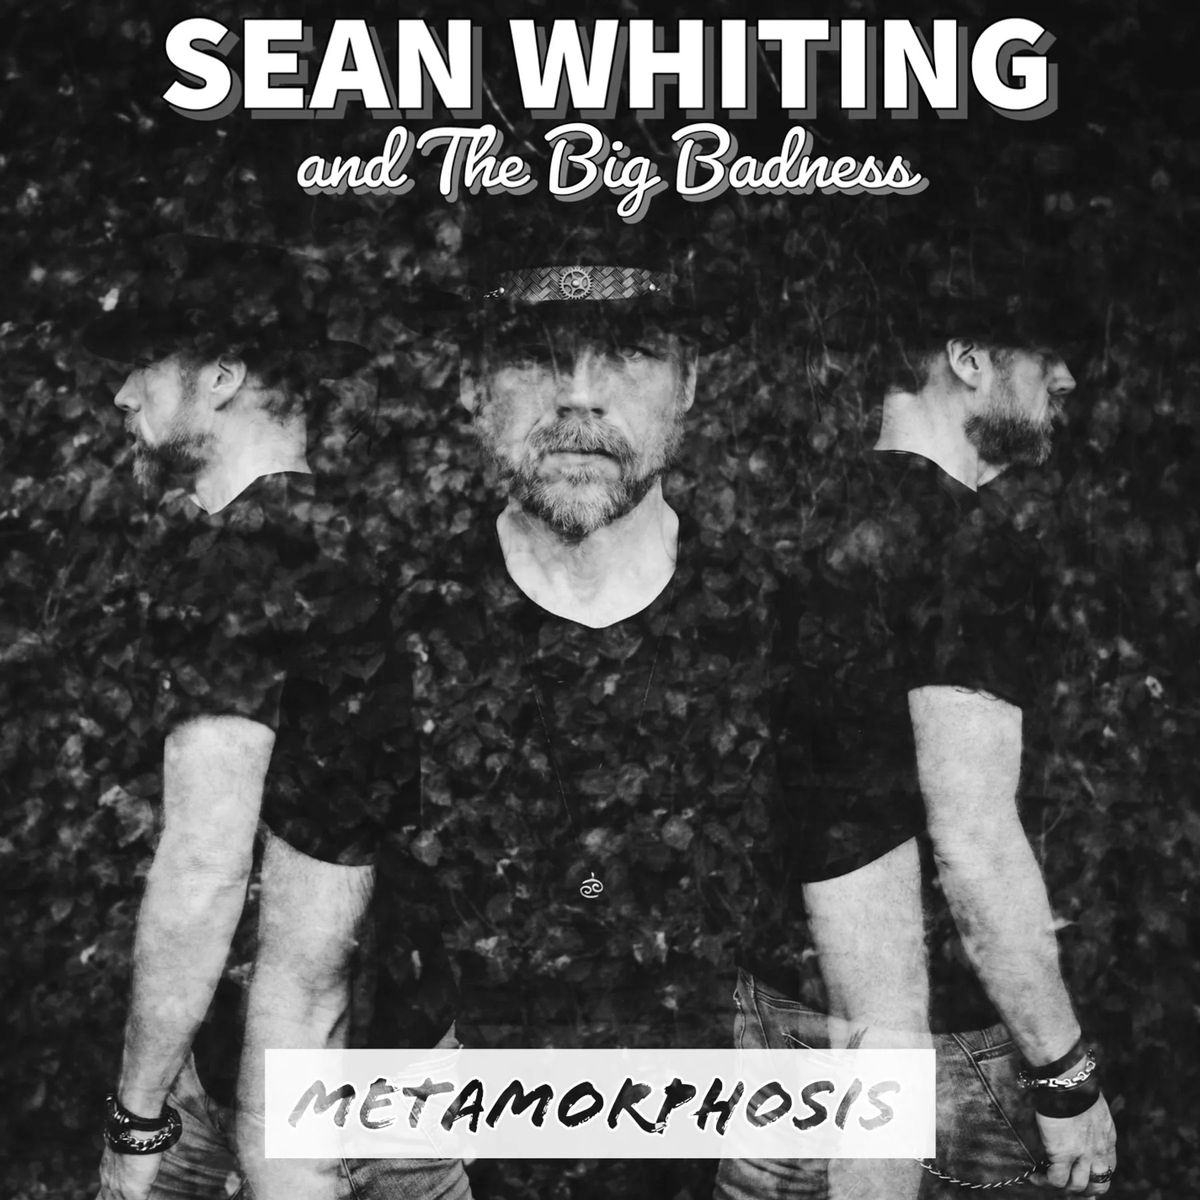 Sean Whiting and the Big Badness